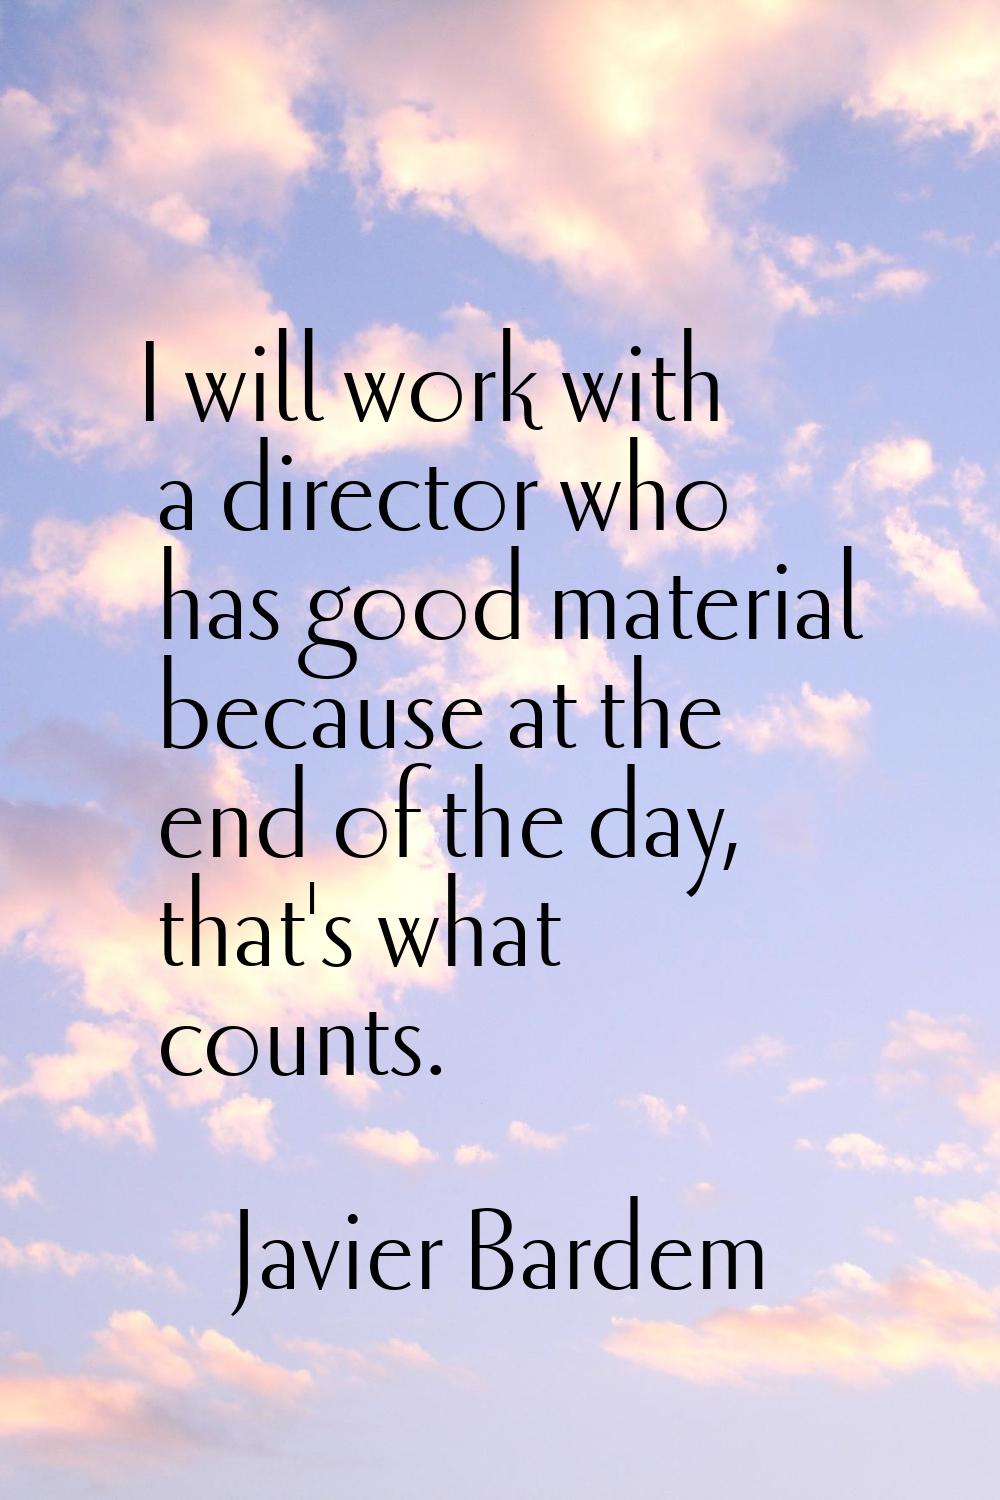 I will work with a director who has good material because at the end of the day, that's what counts